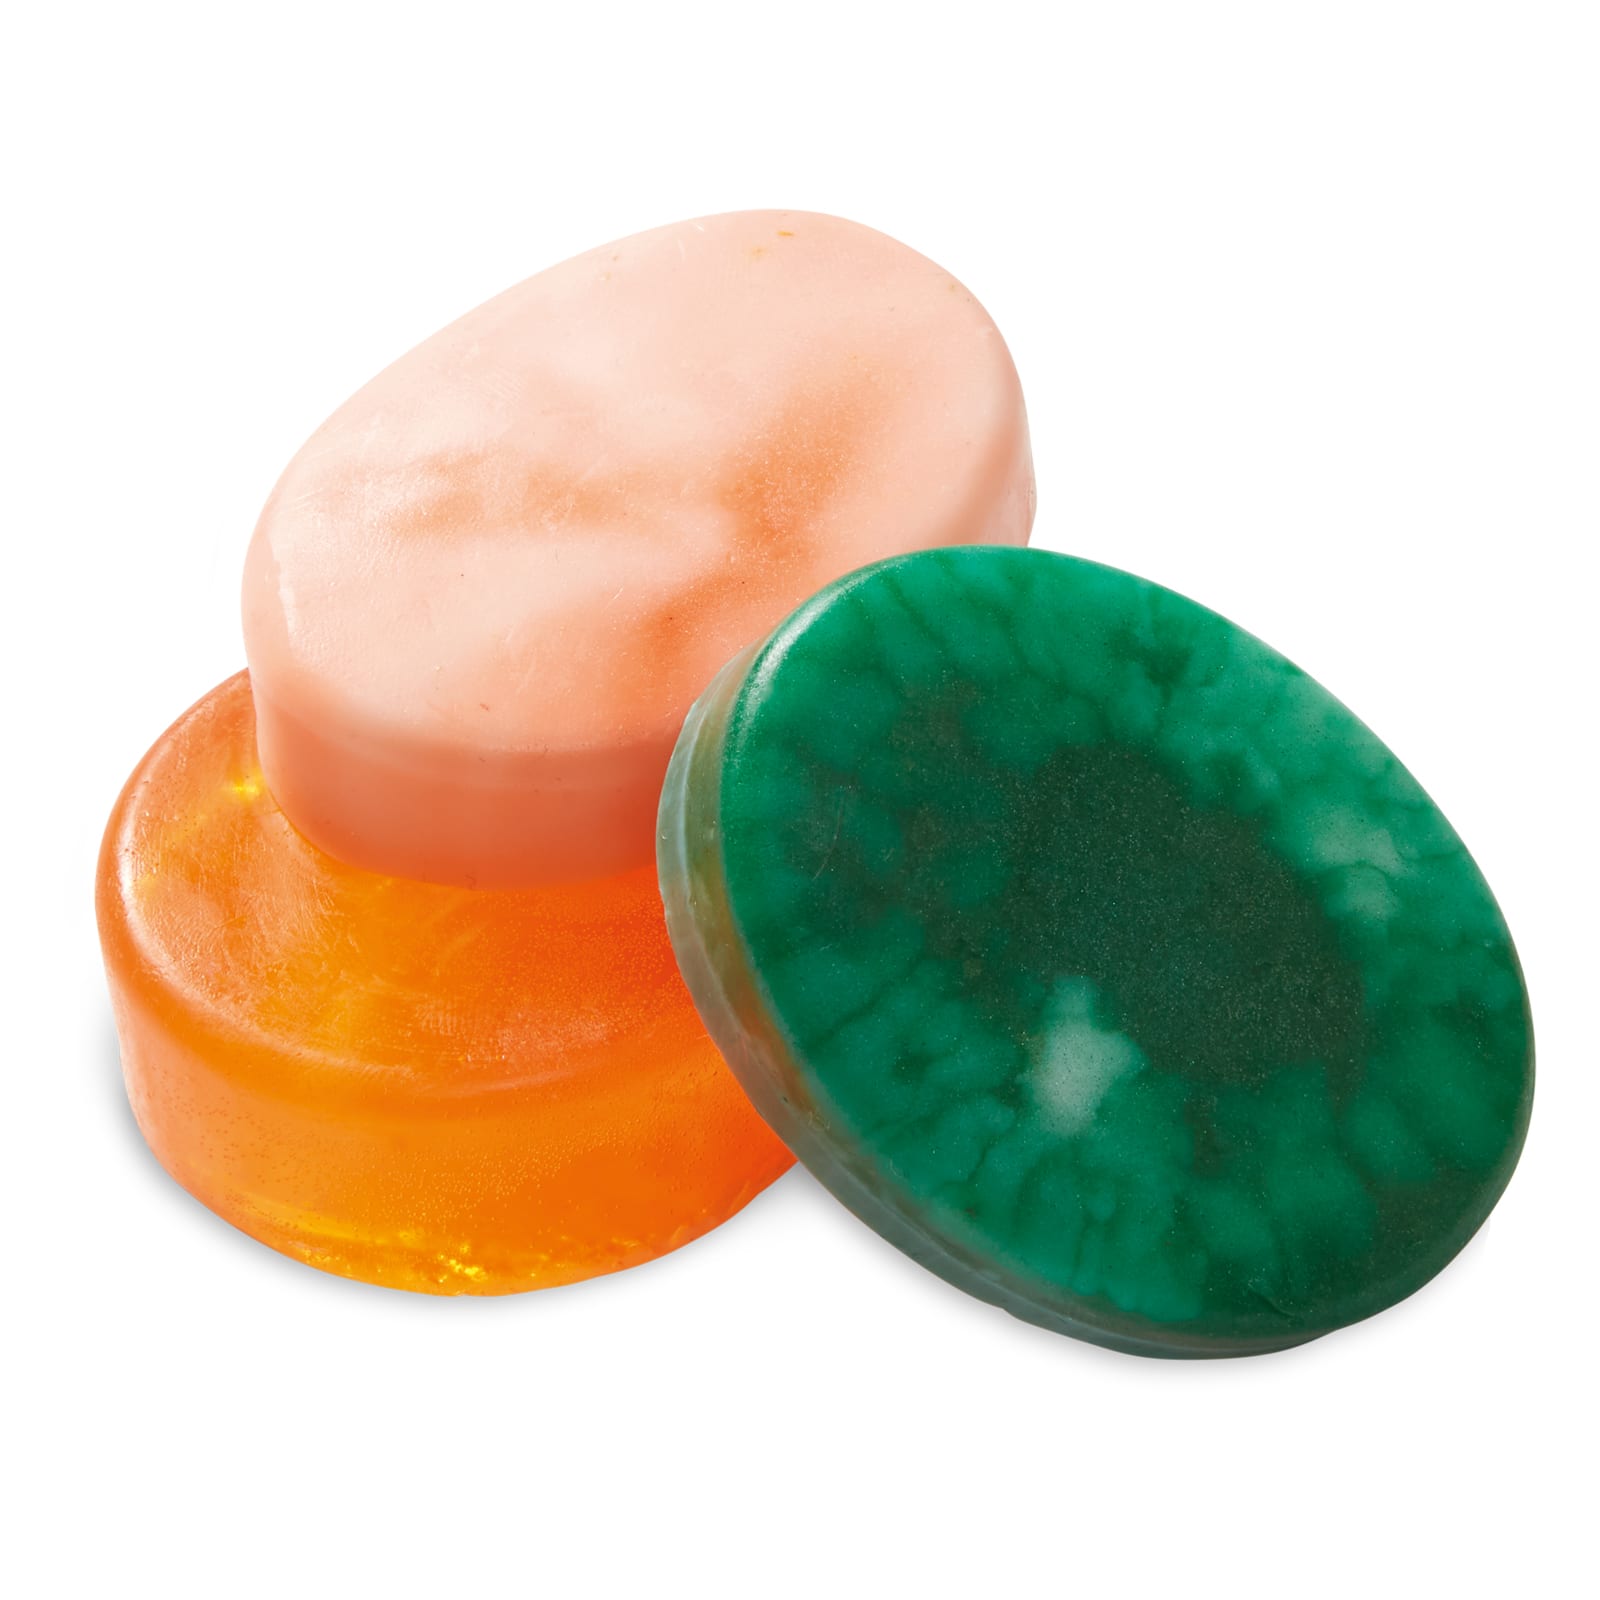 Silicone Oval Soap Mold by Make Market&#xAE;